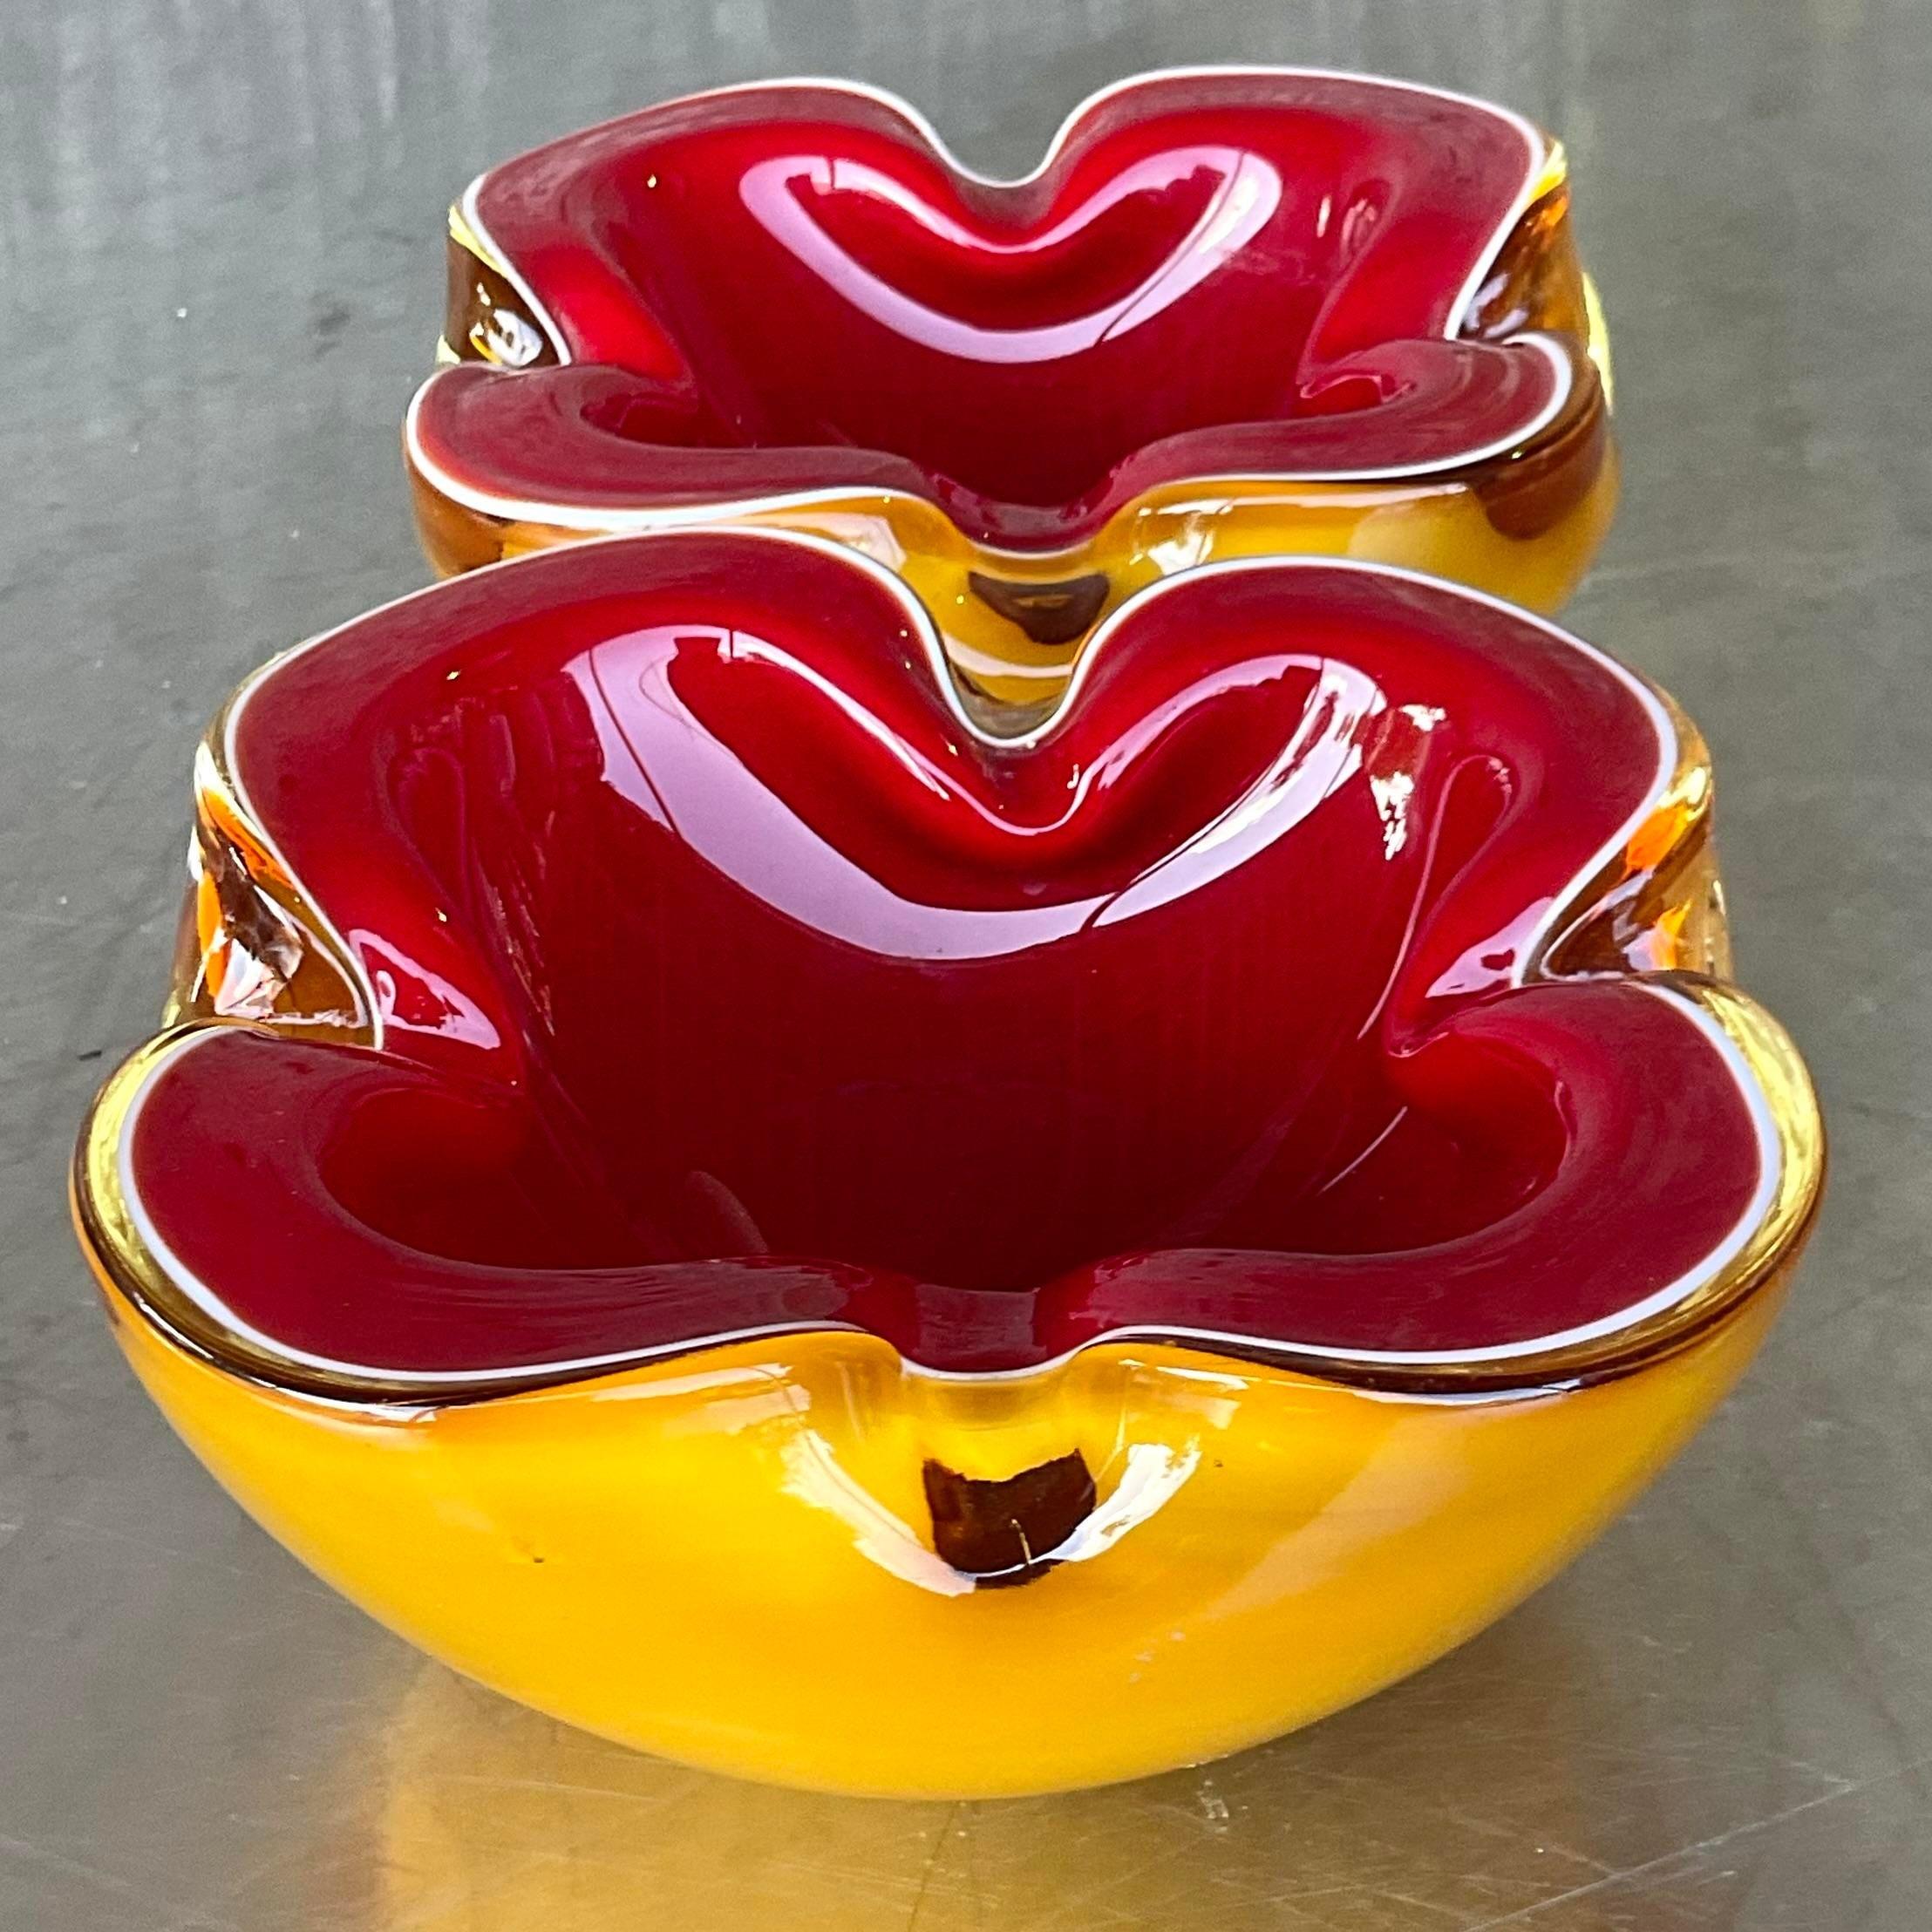 20th Century Vintage Italian Murano Barbini Attributed Glass Bowls - a Pair For Sale